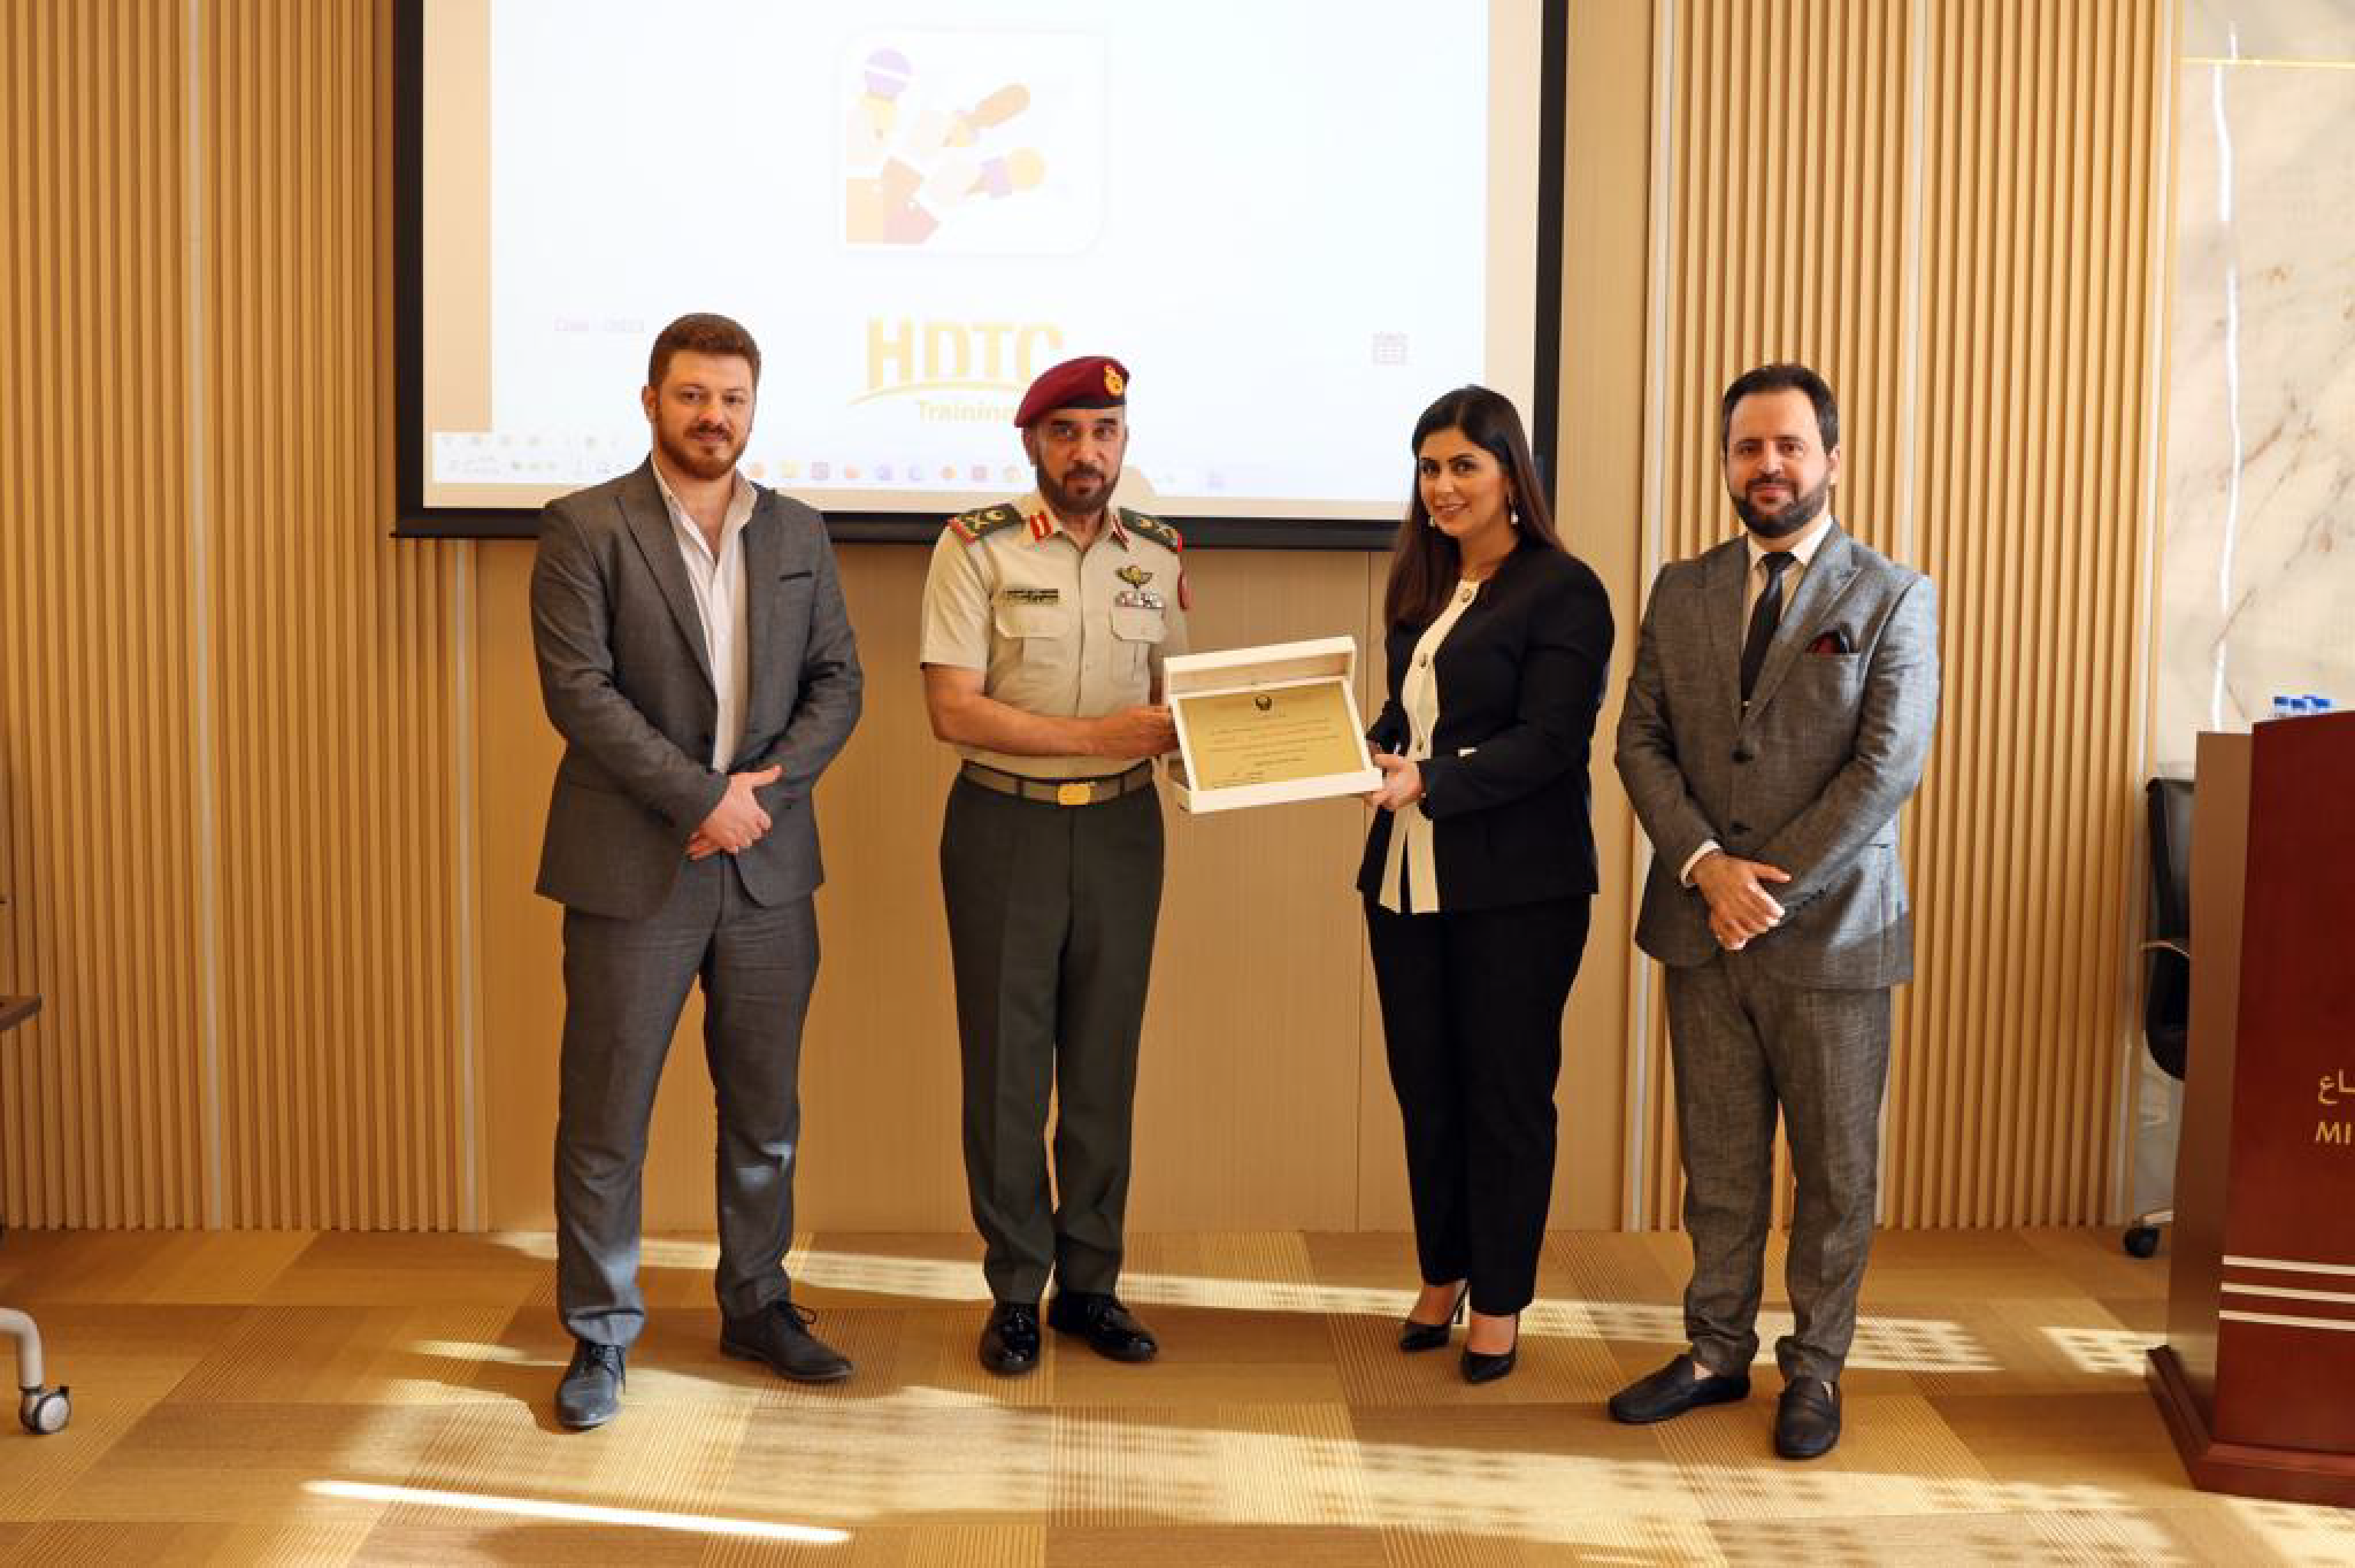 HDTC Training Center was honored by the Director of the Office of His Highness the Minister of Defense